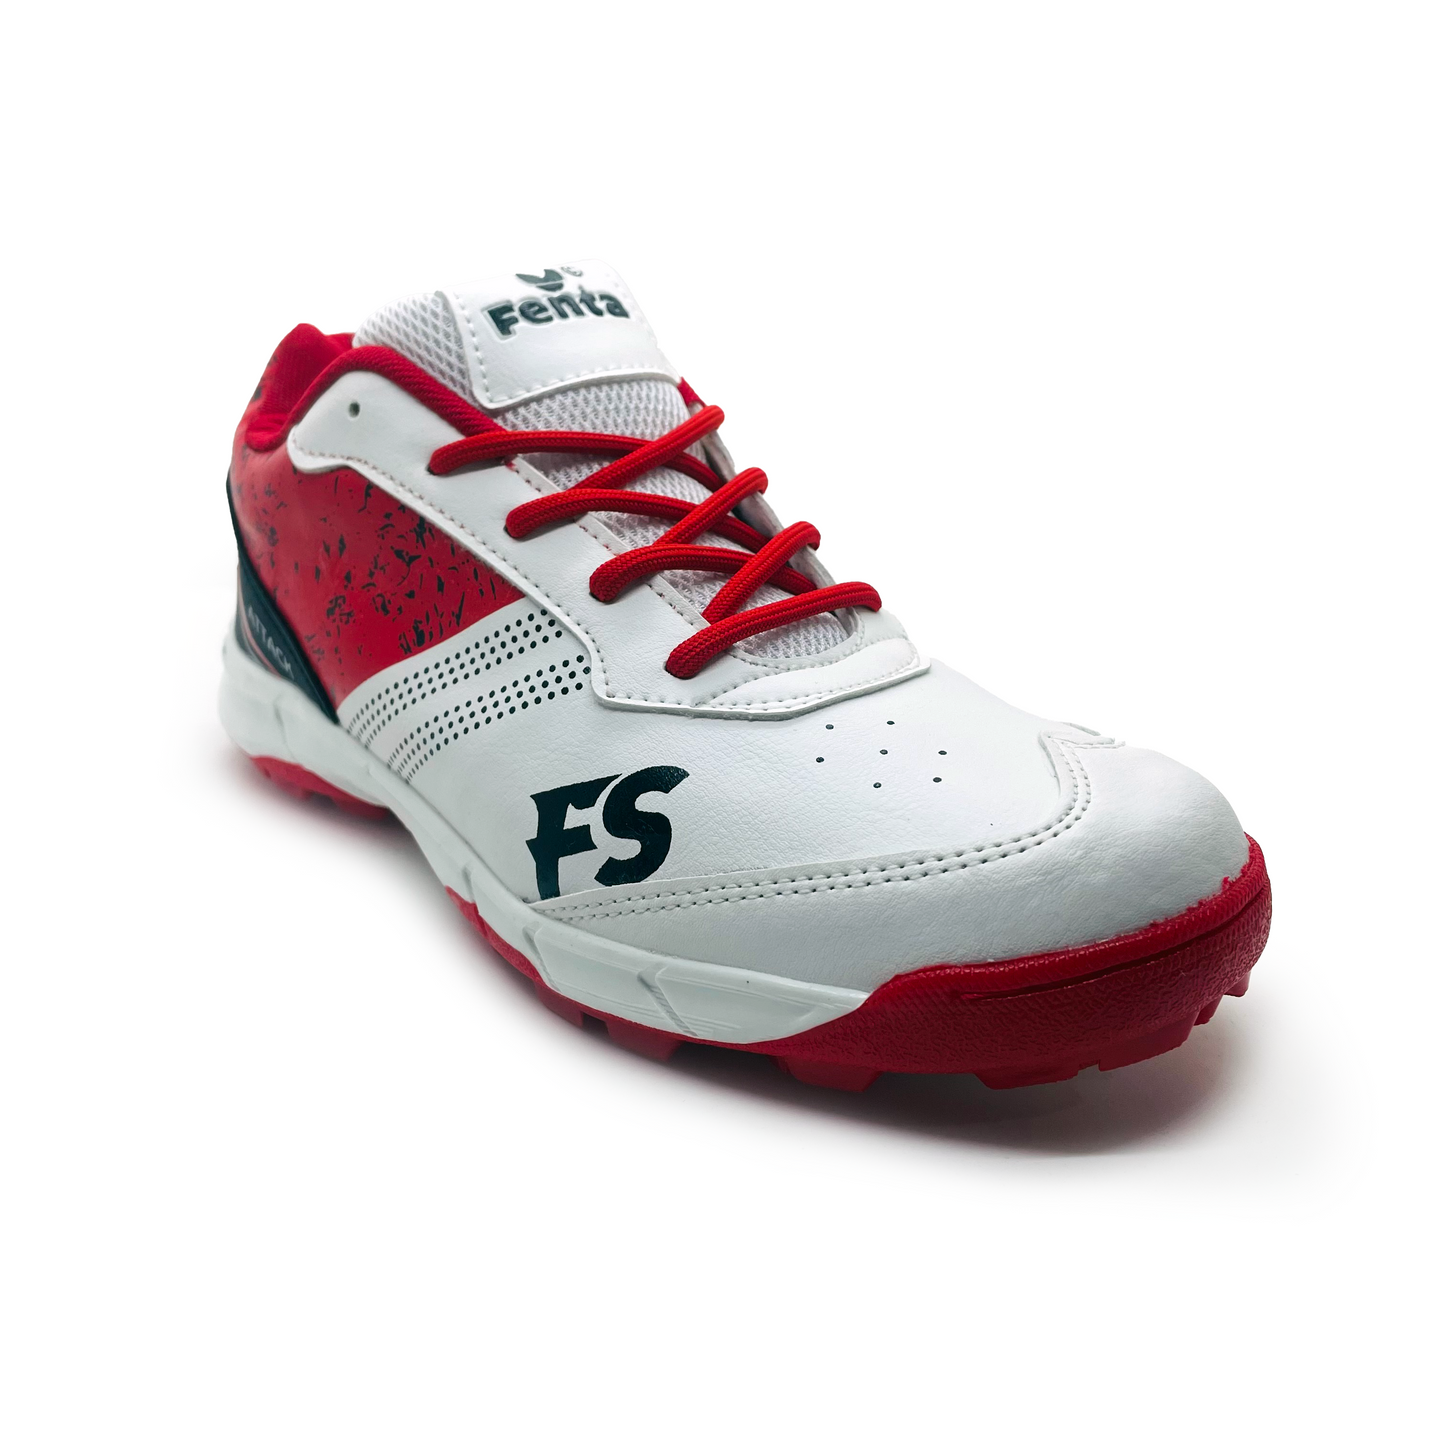 Fenta Sports Unisex Attack Cricket Shoes (Multiclours)